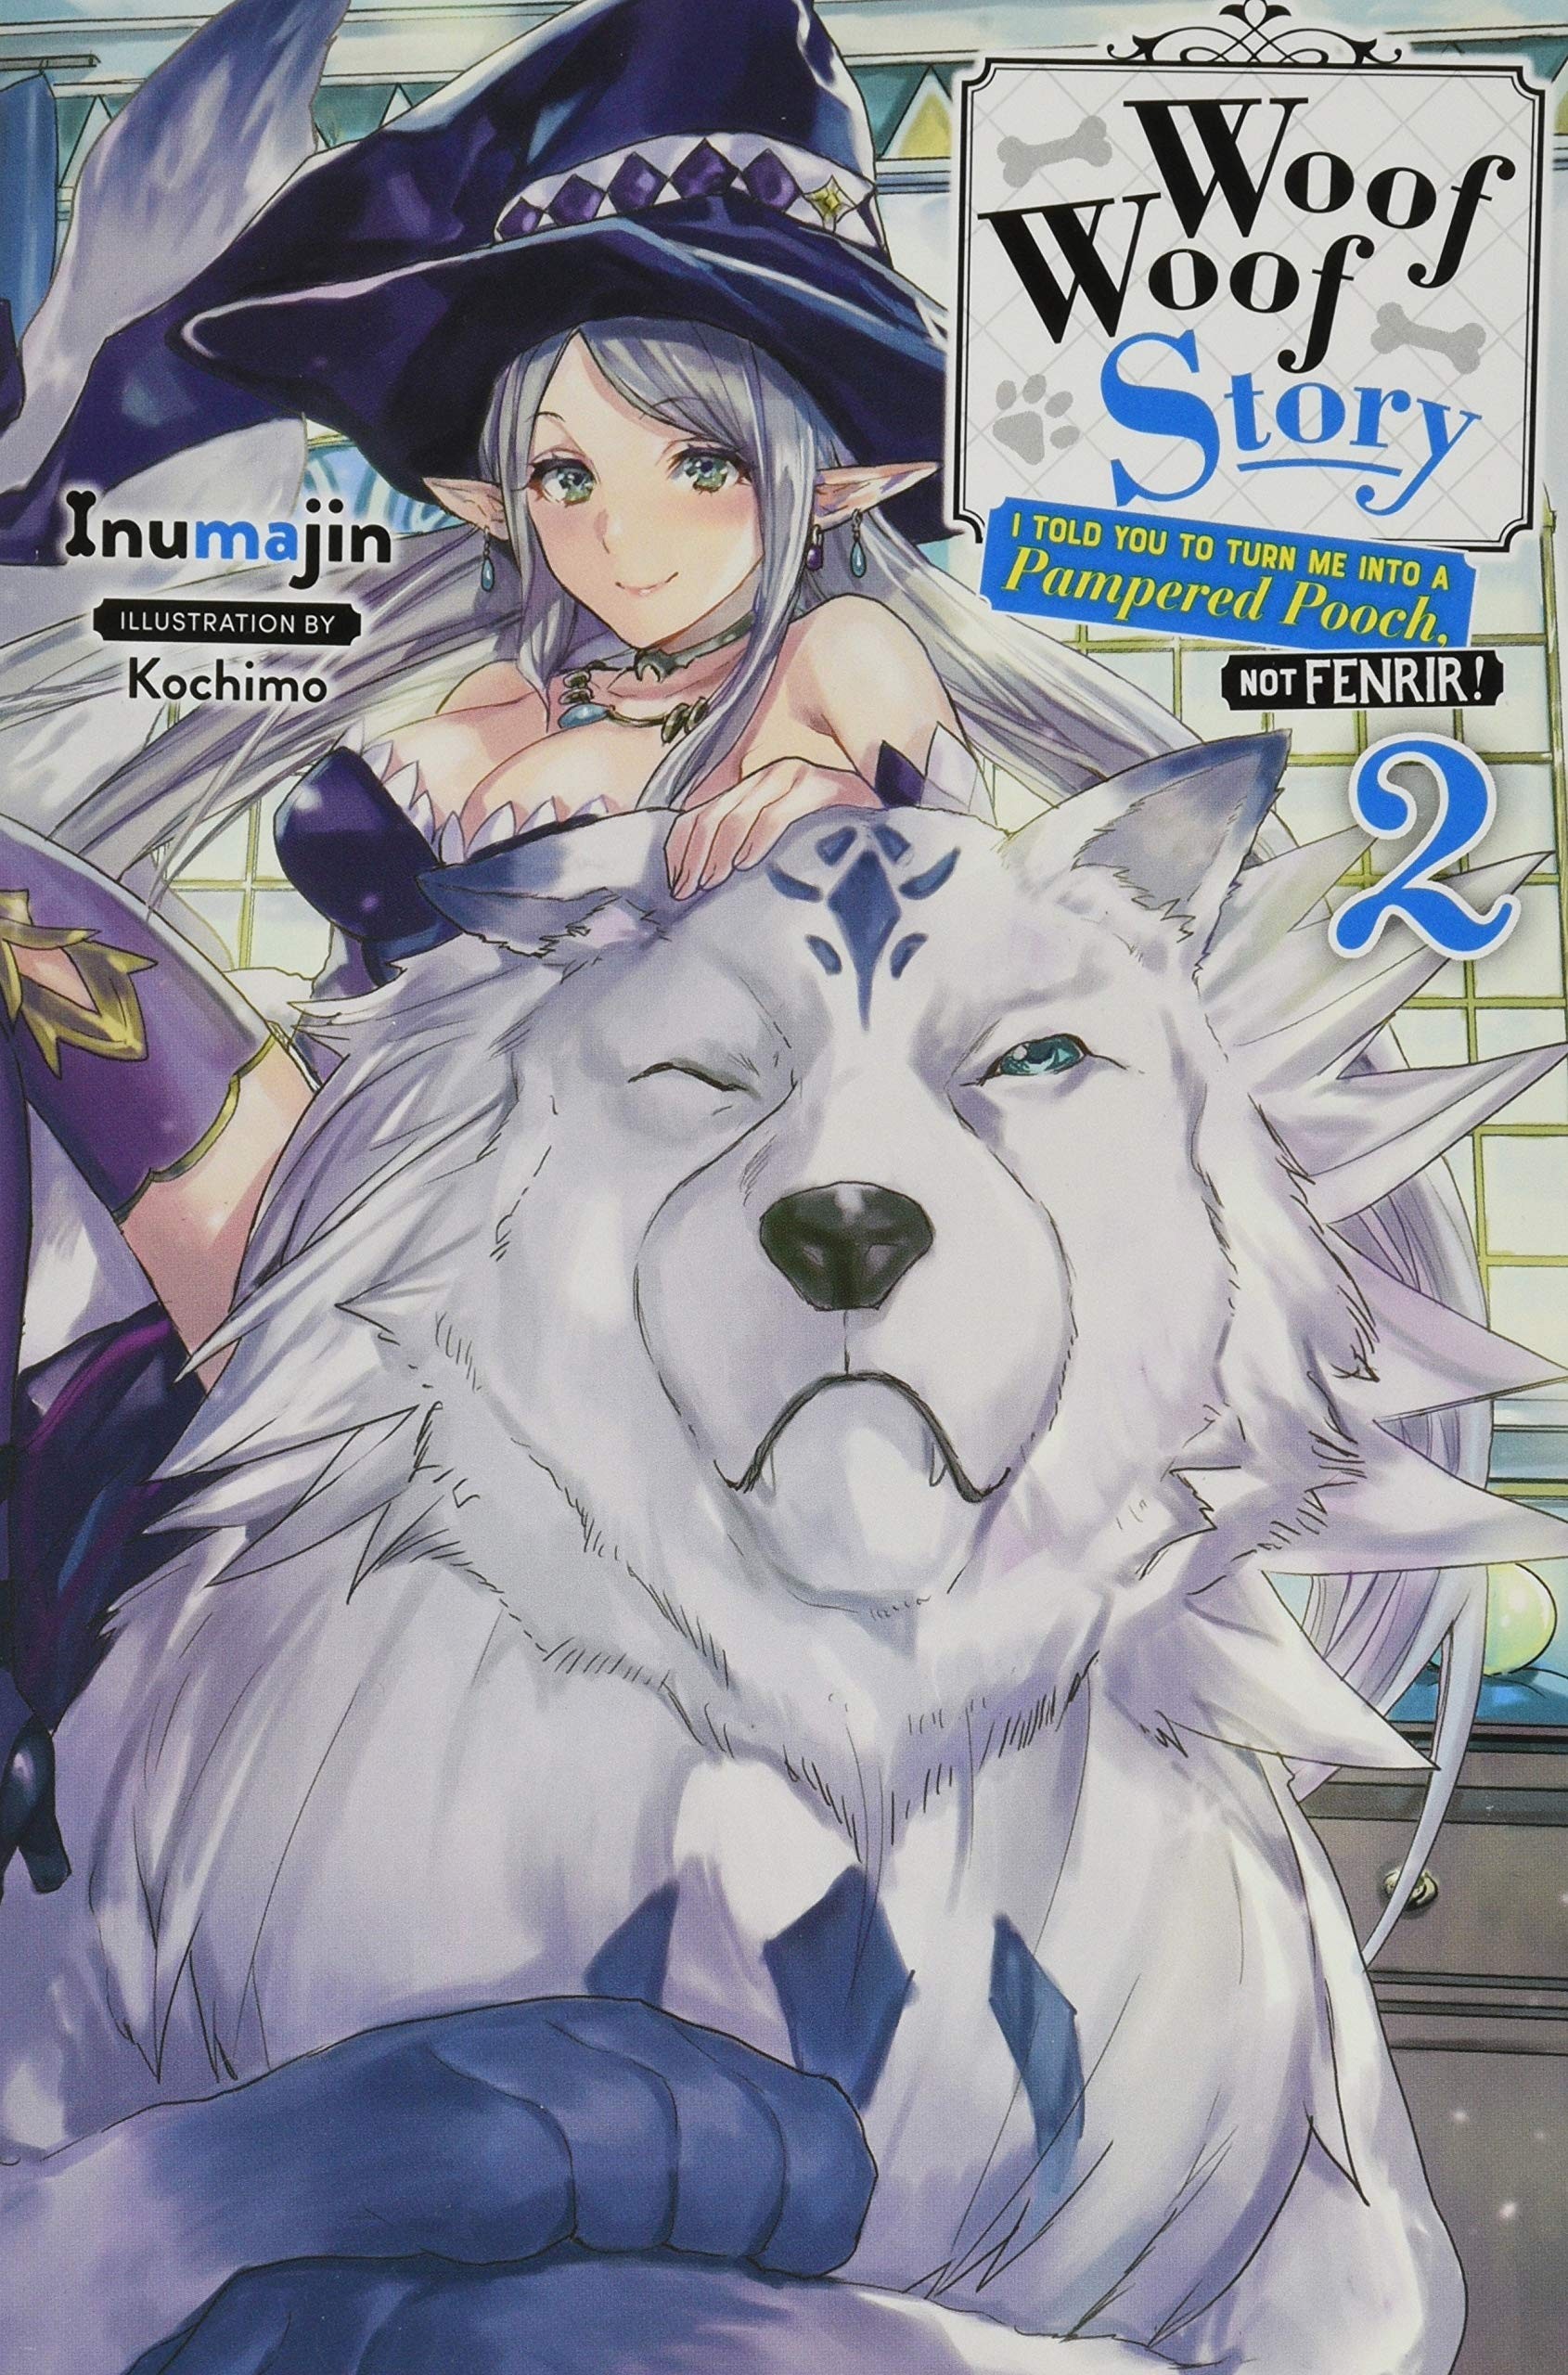 Woof Woof Story: I Told You to Turn Me Into a Pampered Pooch, Not Fenrir!, (Light Novel) Vol. 02